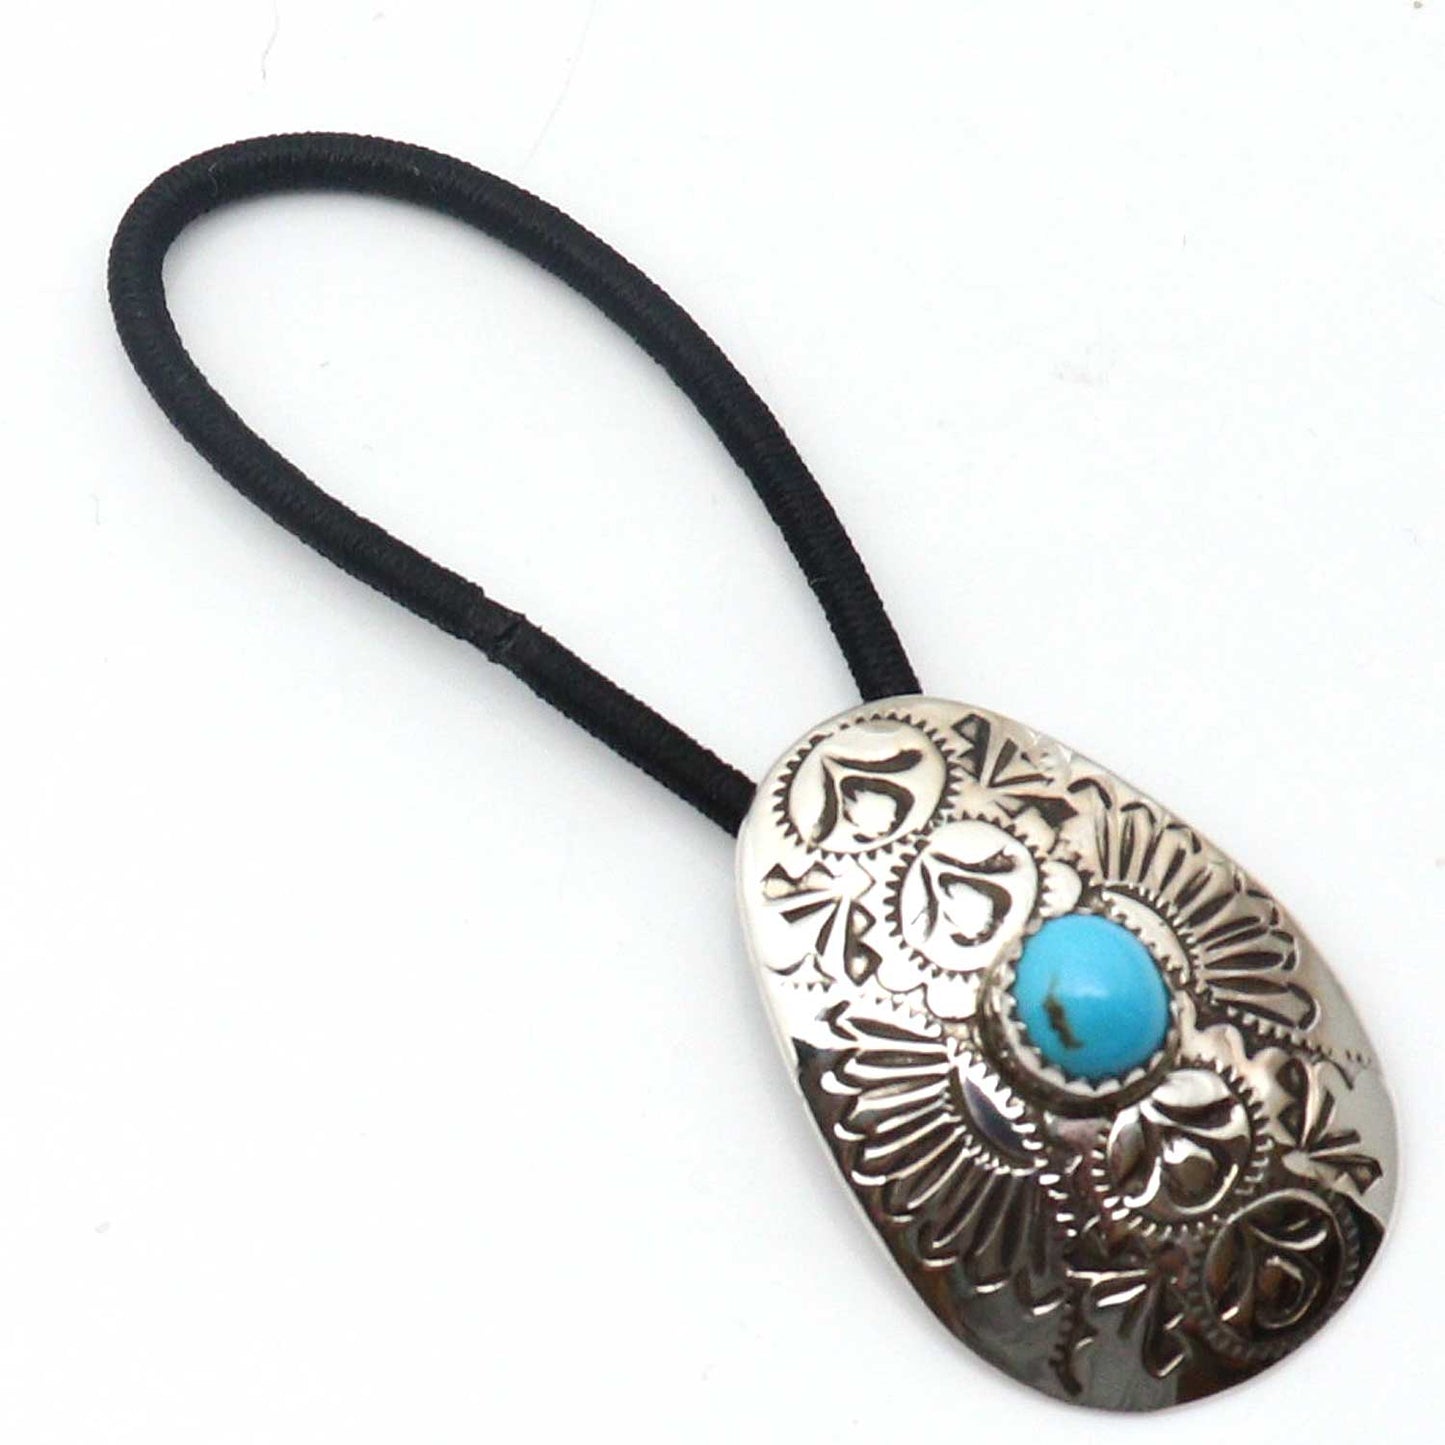 Turquoise & Stamped Silver Hair Tie by Shirley Skeets